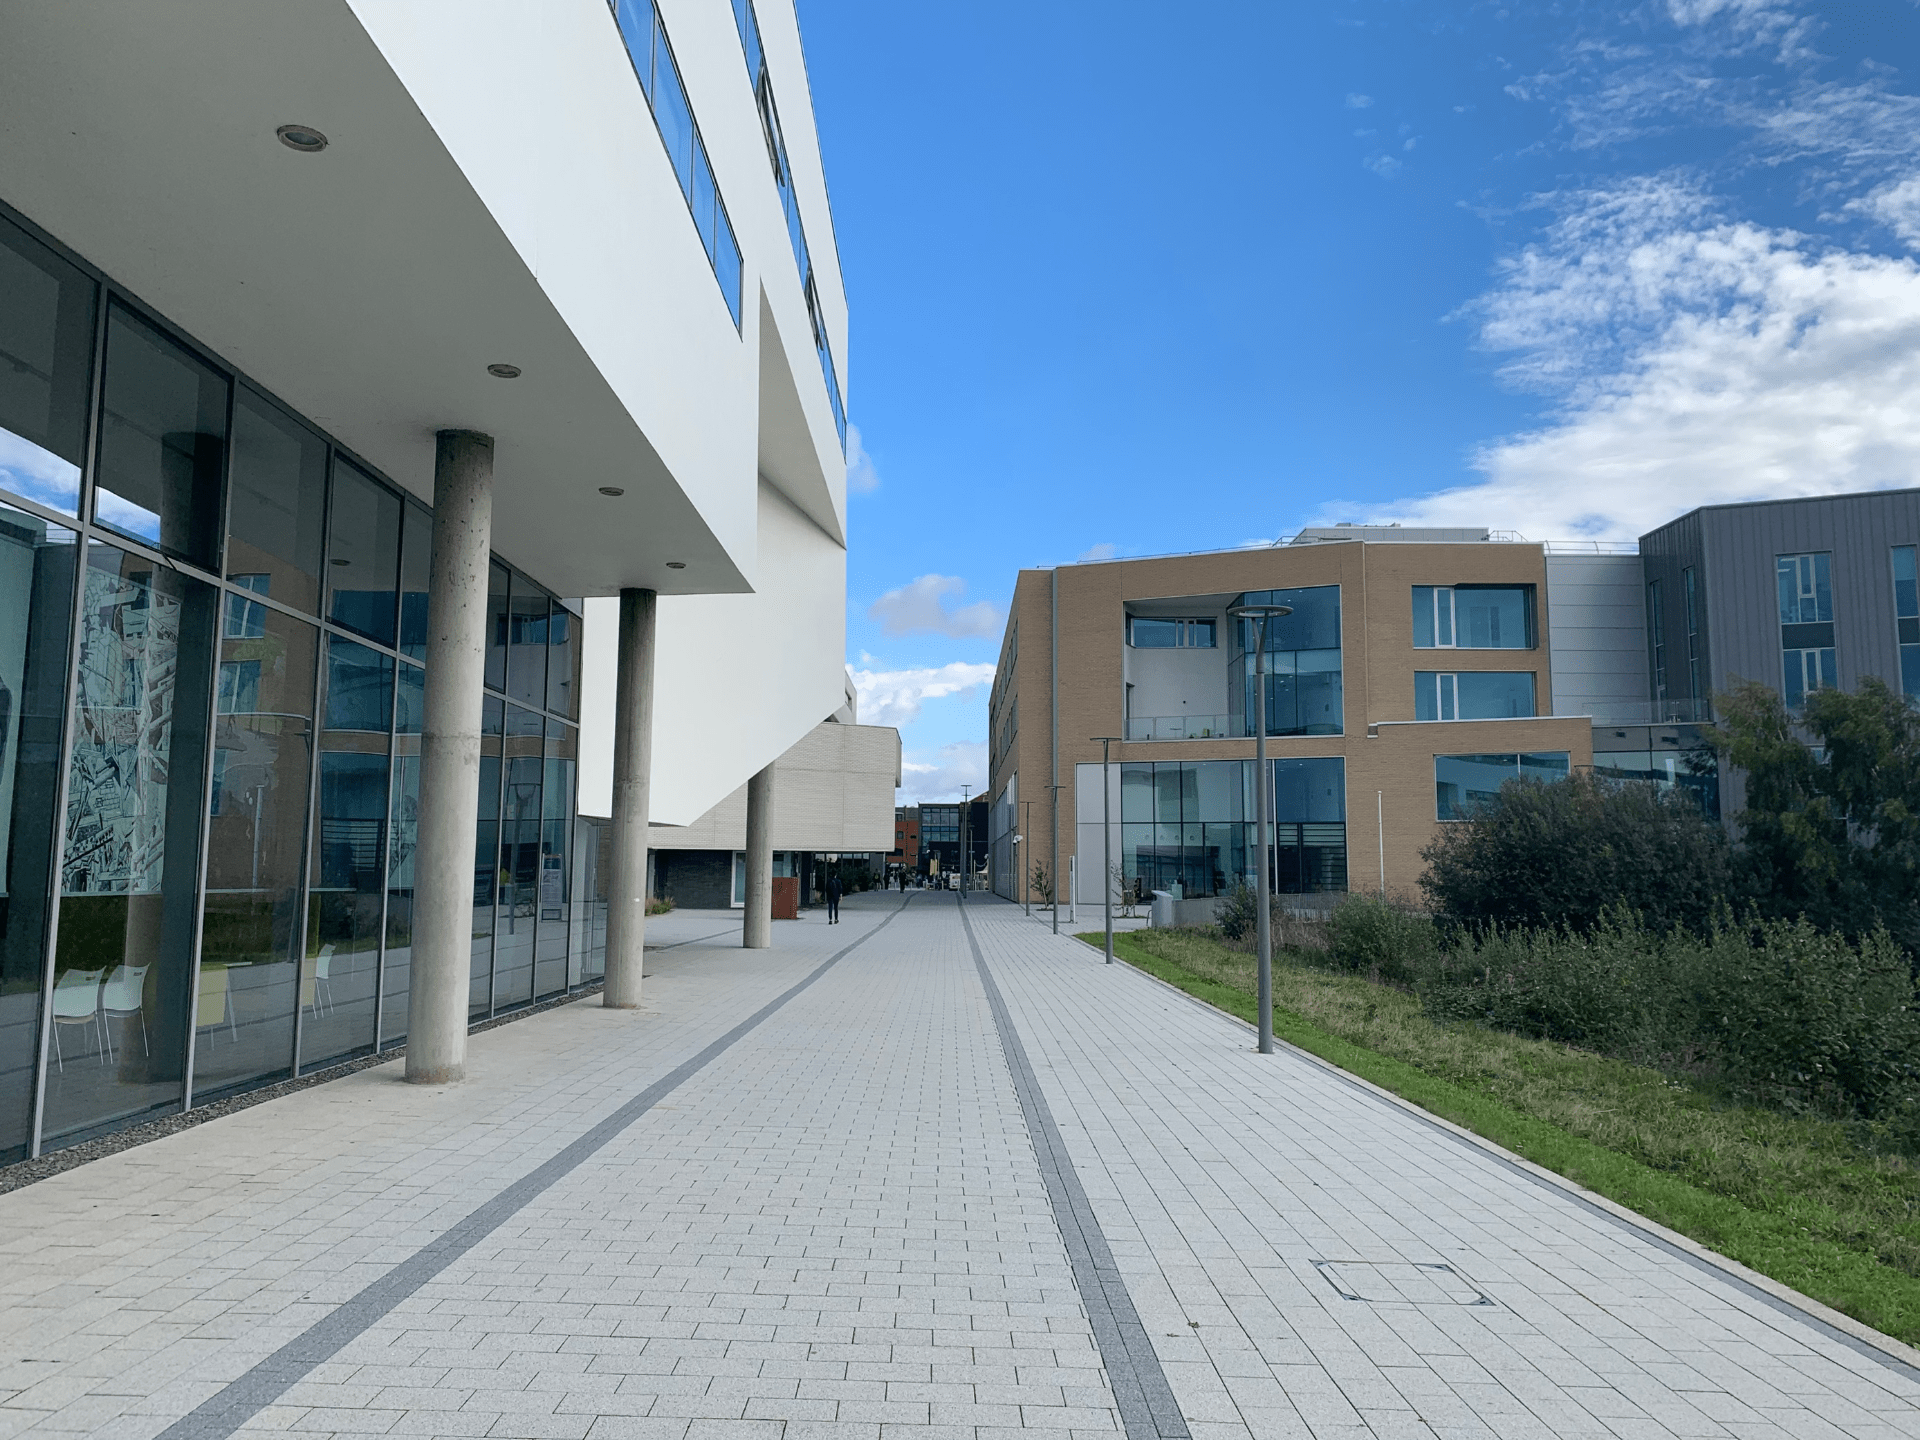 University of Lincoln Campus outside the Isaac Newton Building.